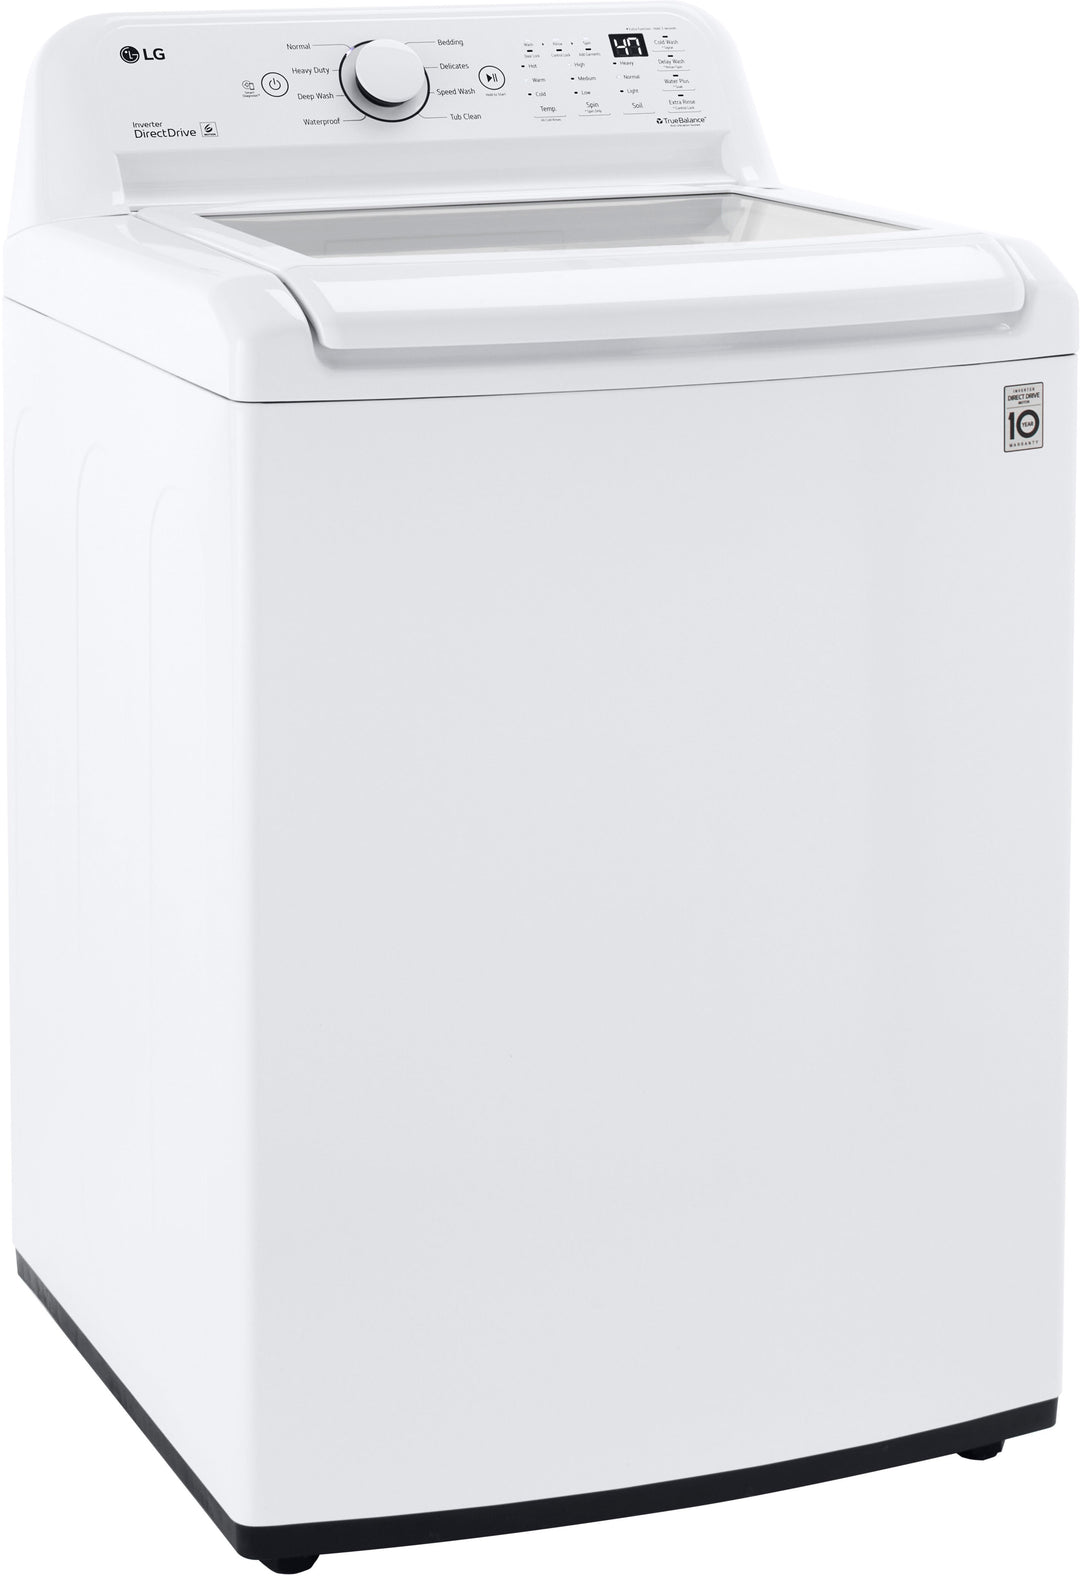 LG - 4.5 Cu. Ft. Smart Top Load Washer with Vibration Reduction and TurboDrum Technology - White_13